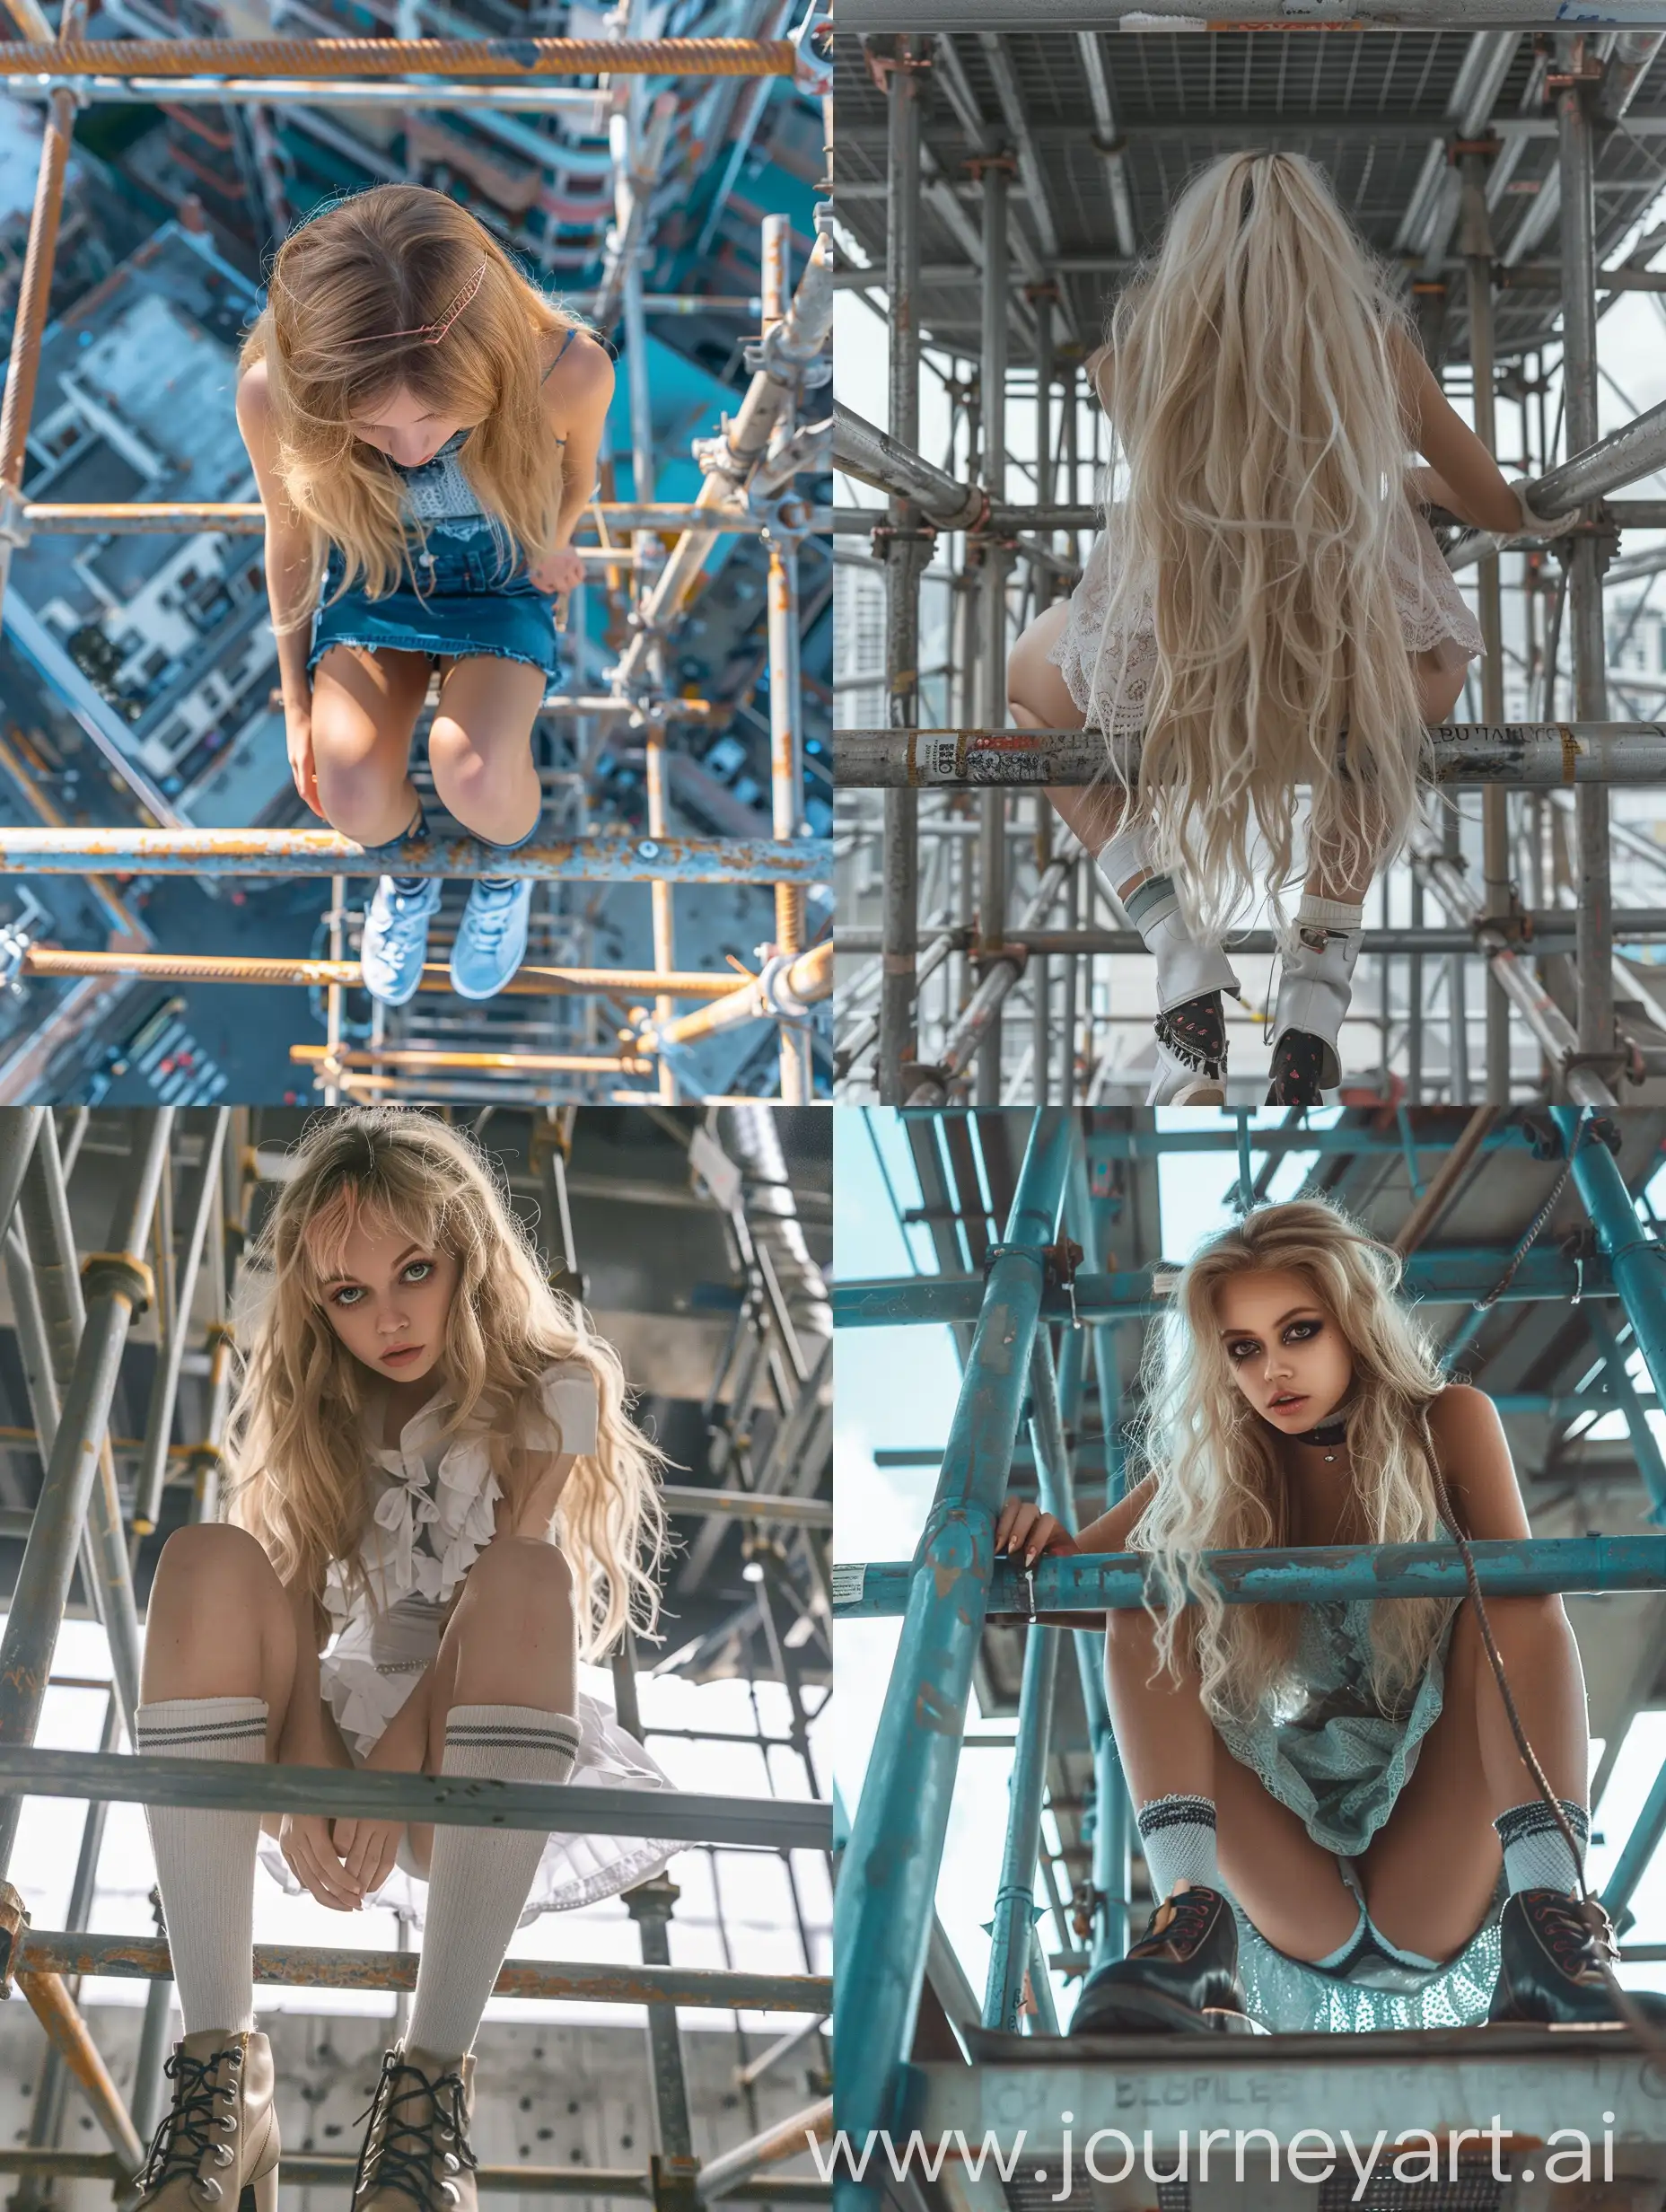 1 girl, long blond hair, 18 years old, influencer, beauty,  dress, makeup,, , down view, socks and boots, 4k, , is working on a steel scaffold under construction